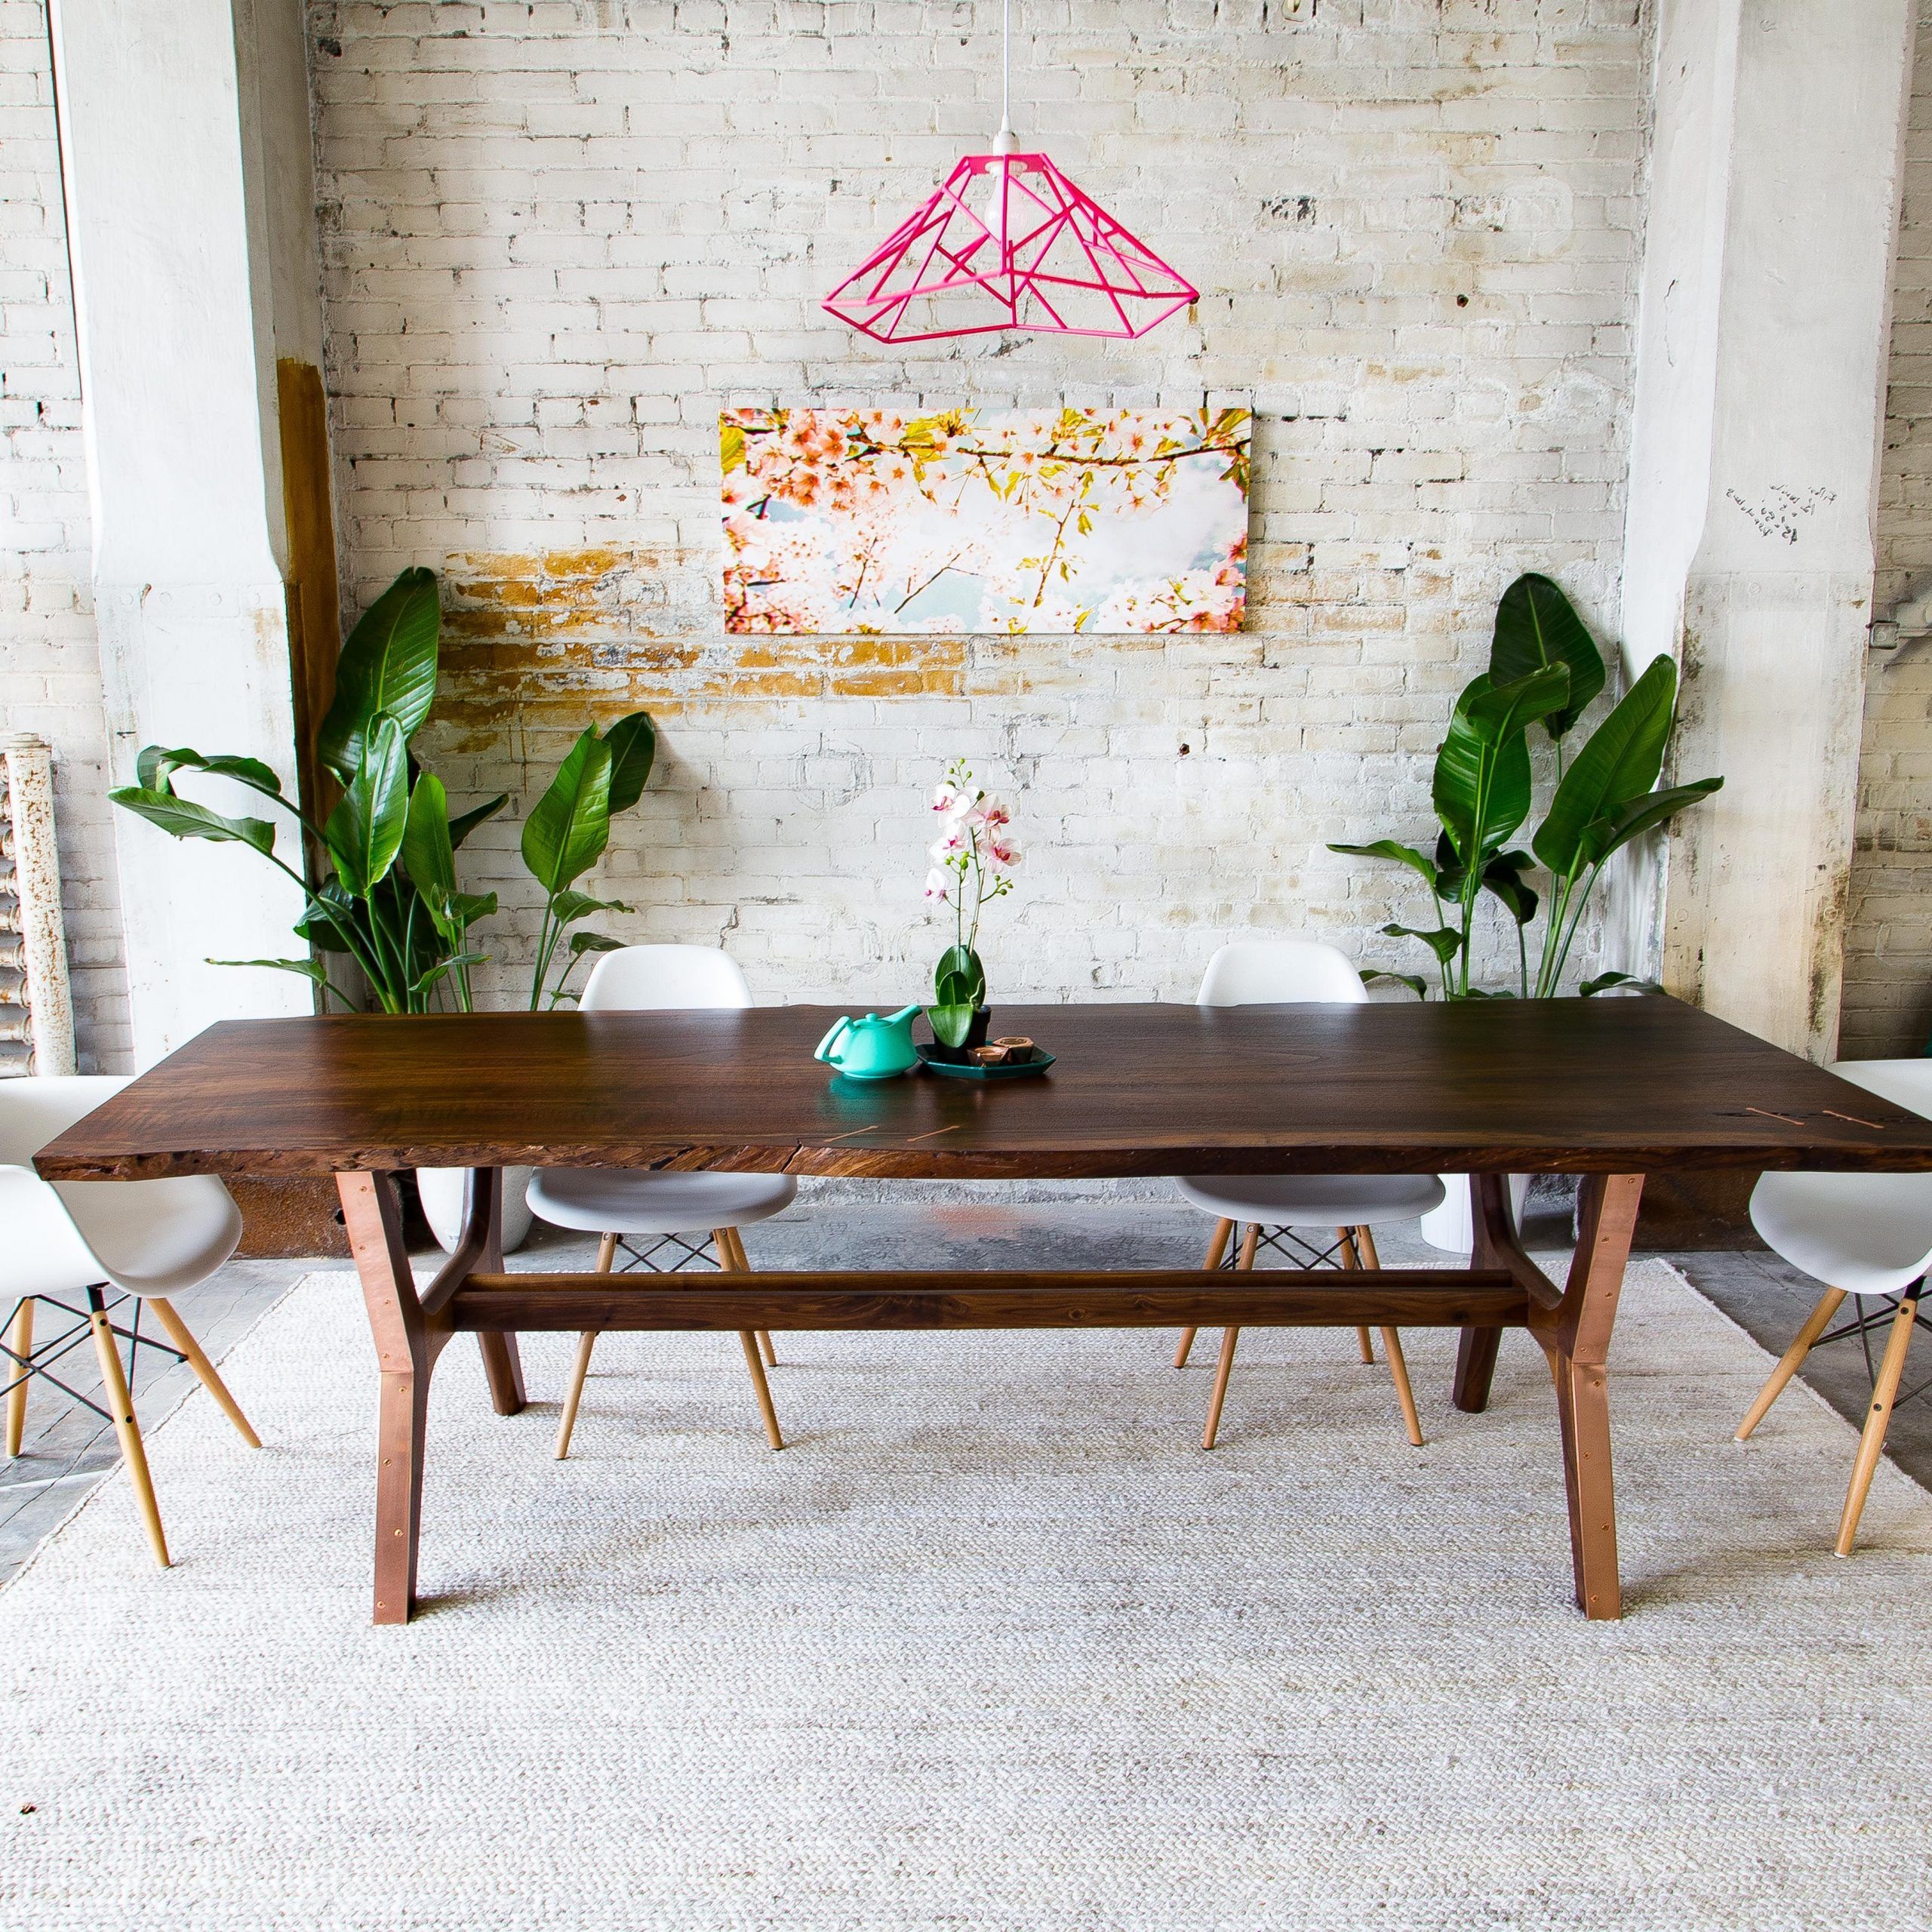 Preferred Hand Made Claro Walnut + Copper Live Edge Midcentury Modern Regarding Mid Century Rectangular Top Dining Tables With Wood Legs (View 14 of 30)